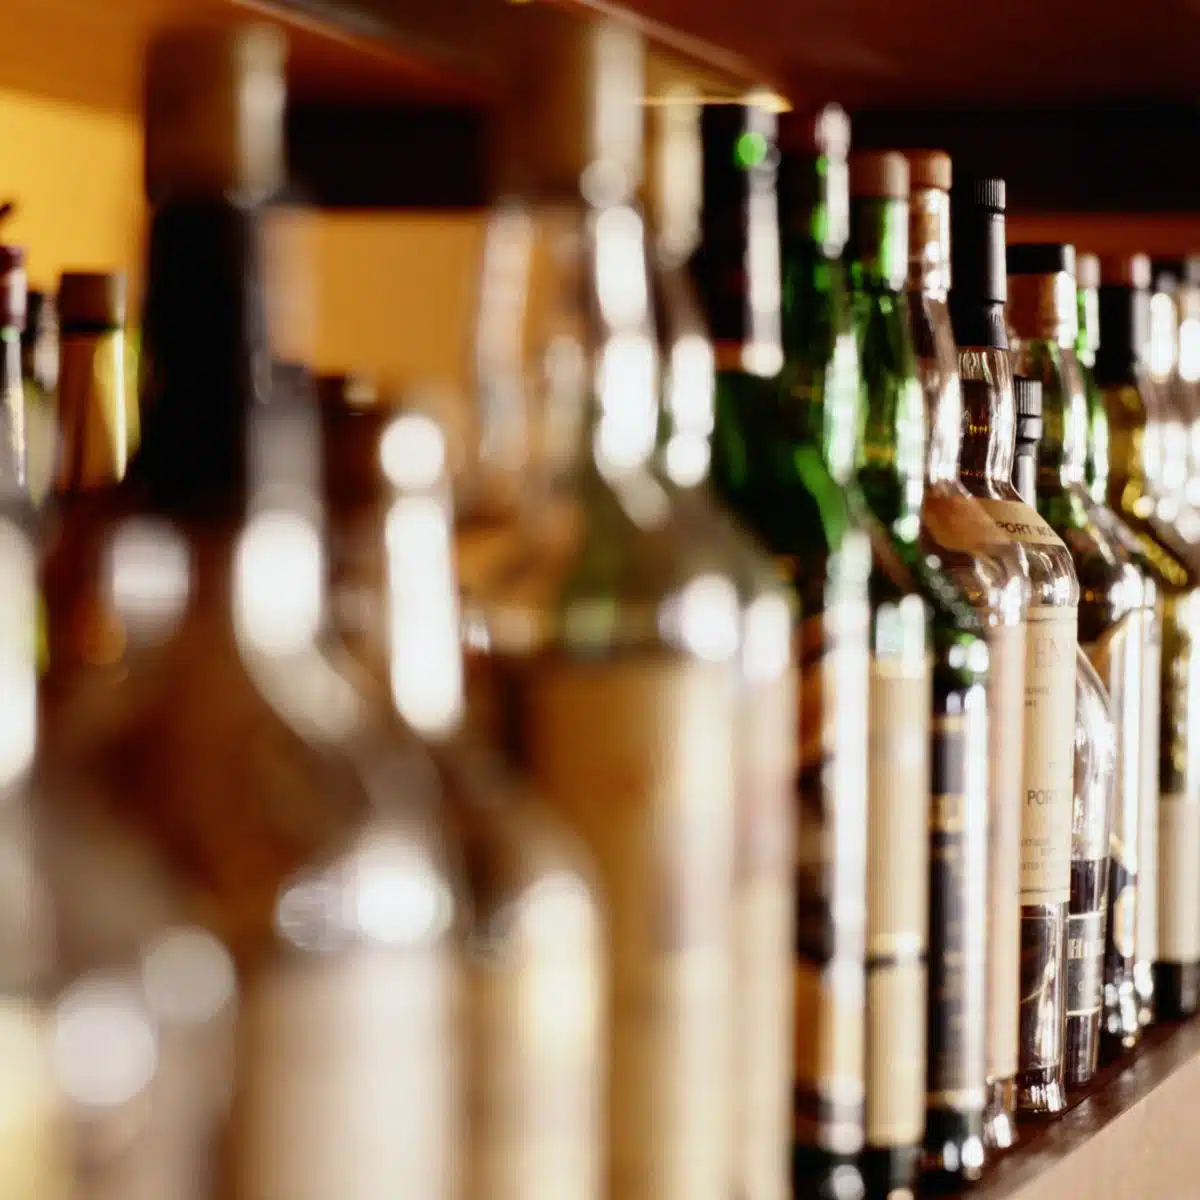 Square image of alcohol bottles lined up.